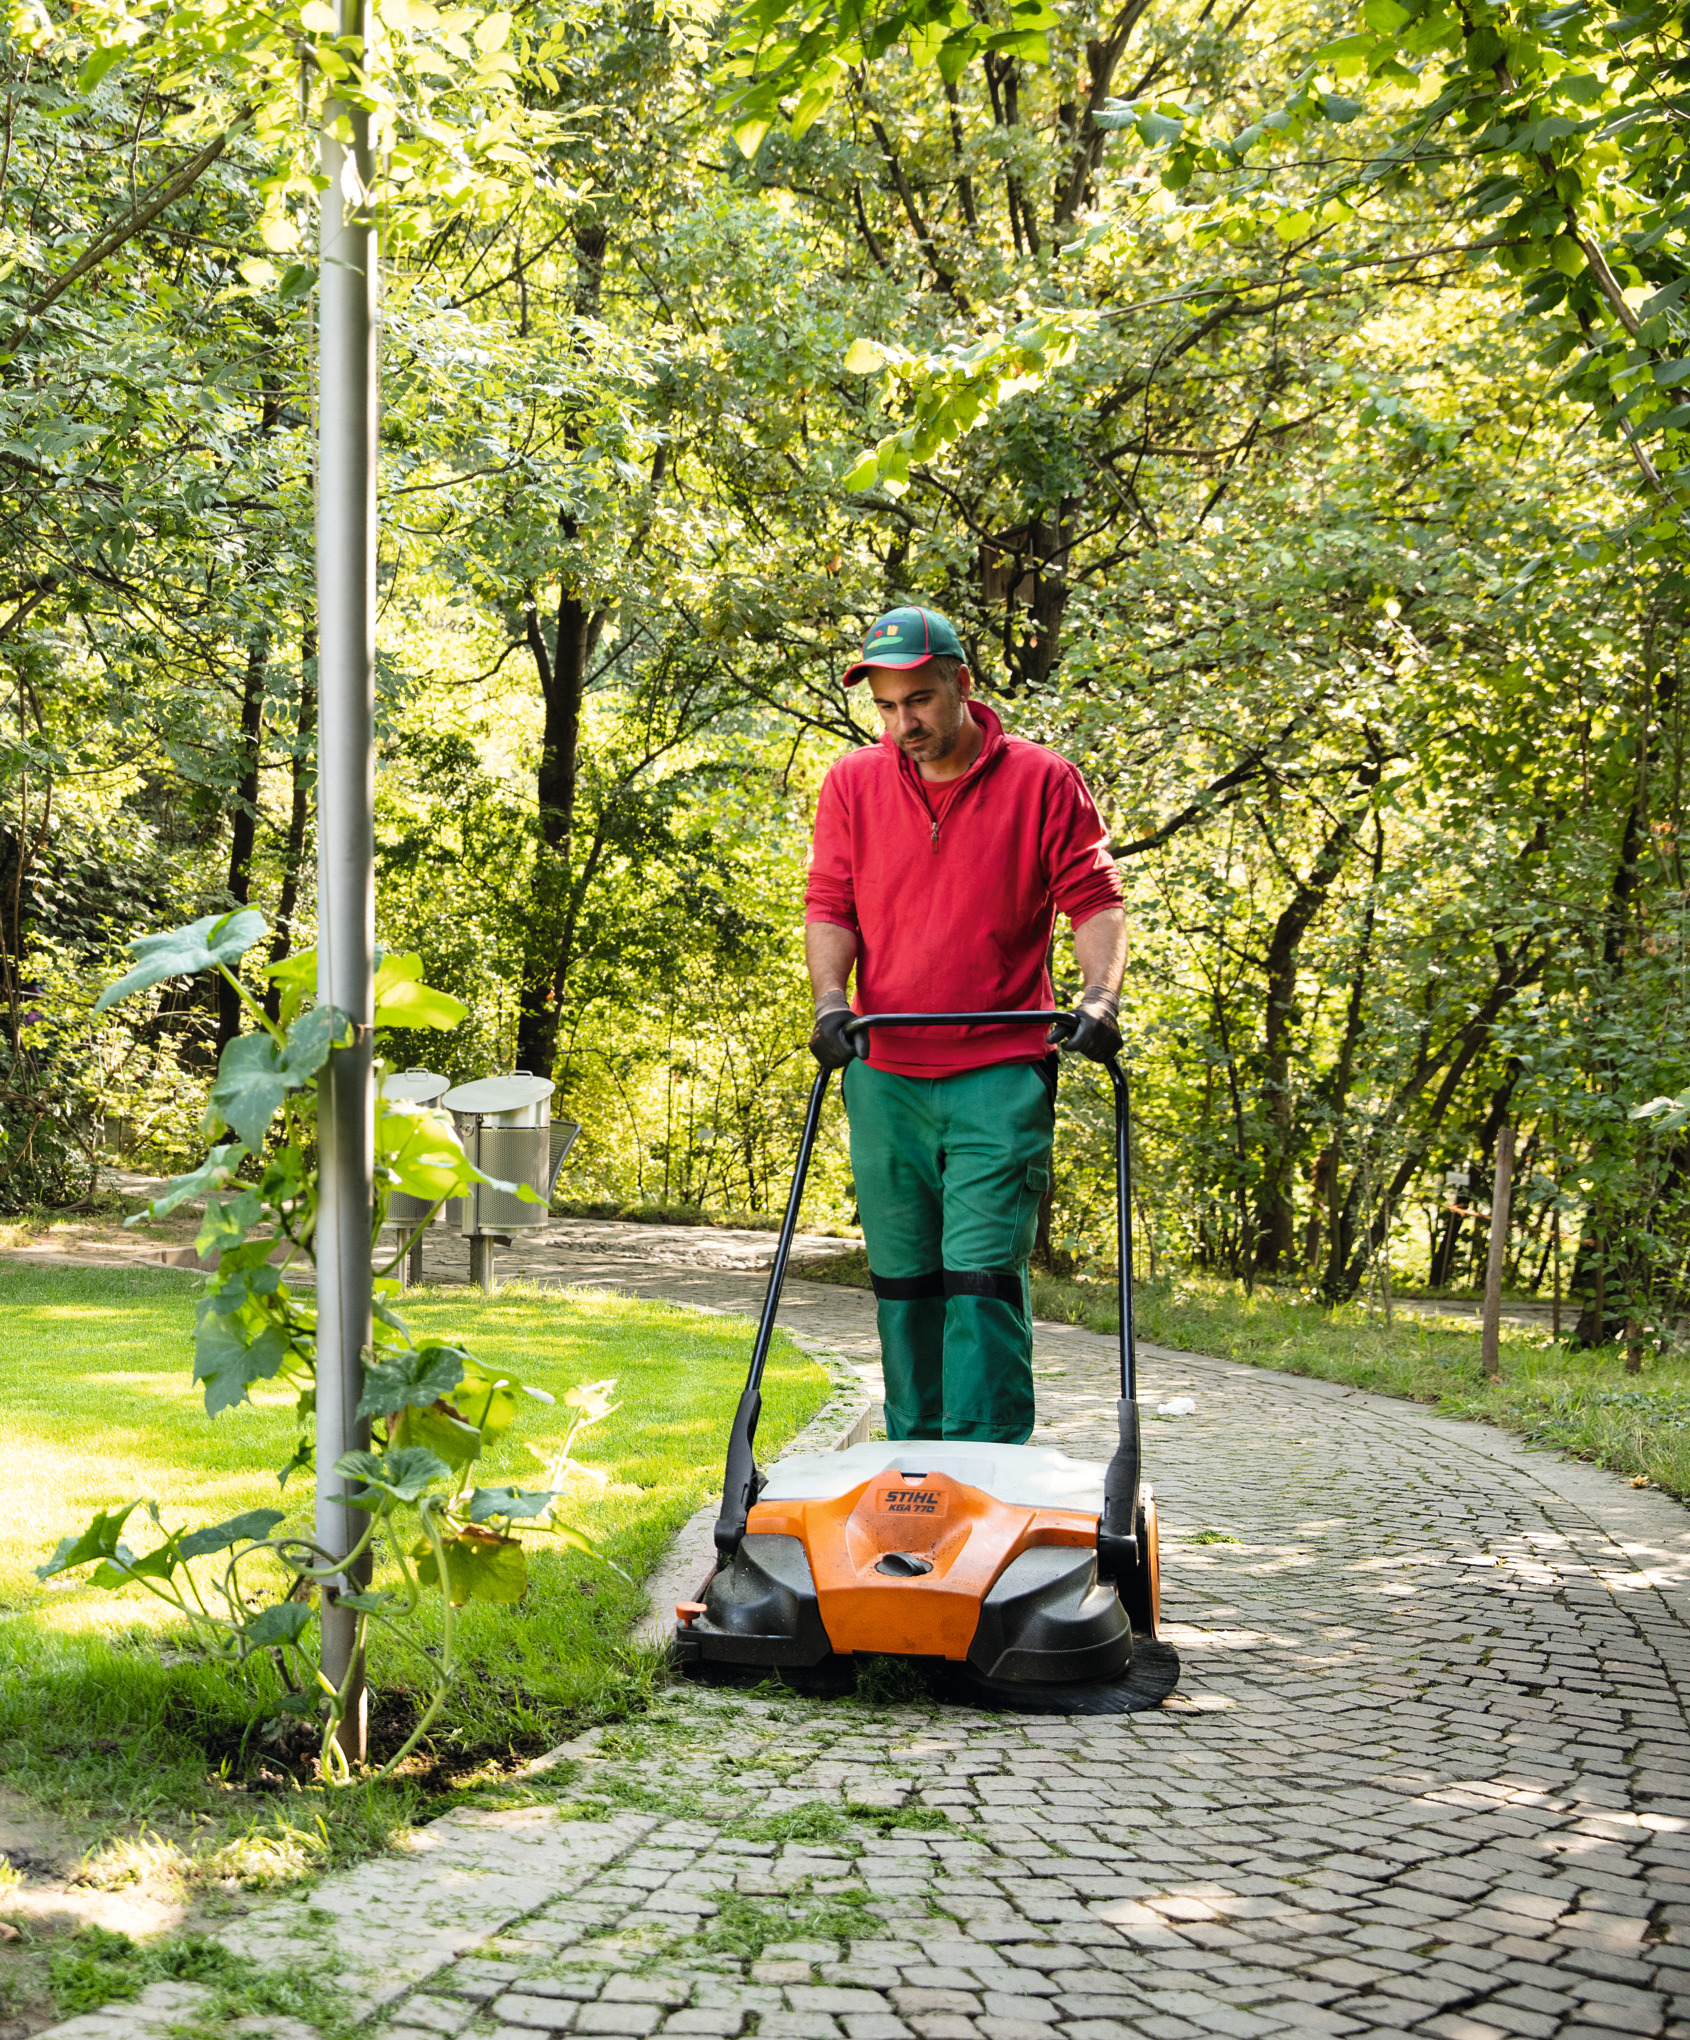 STIHL KGA 770 battery sweeping machines from the AP-System